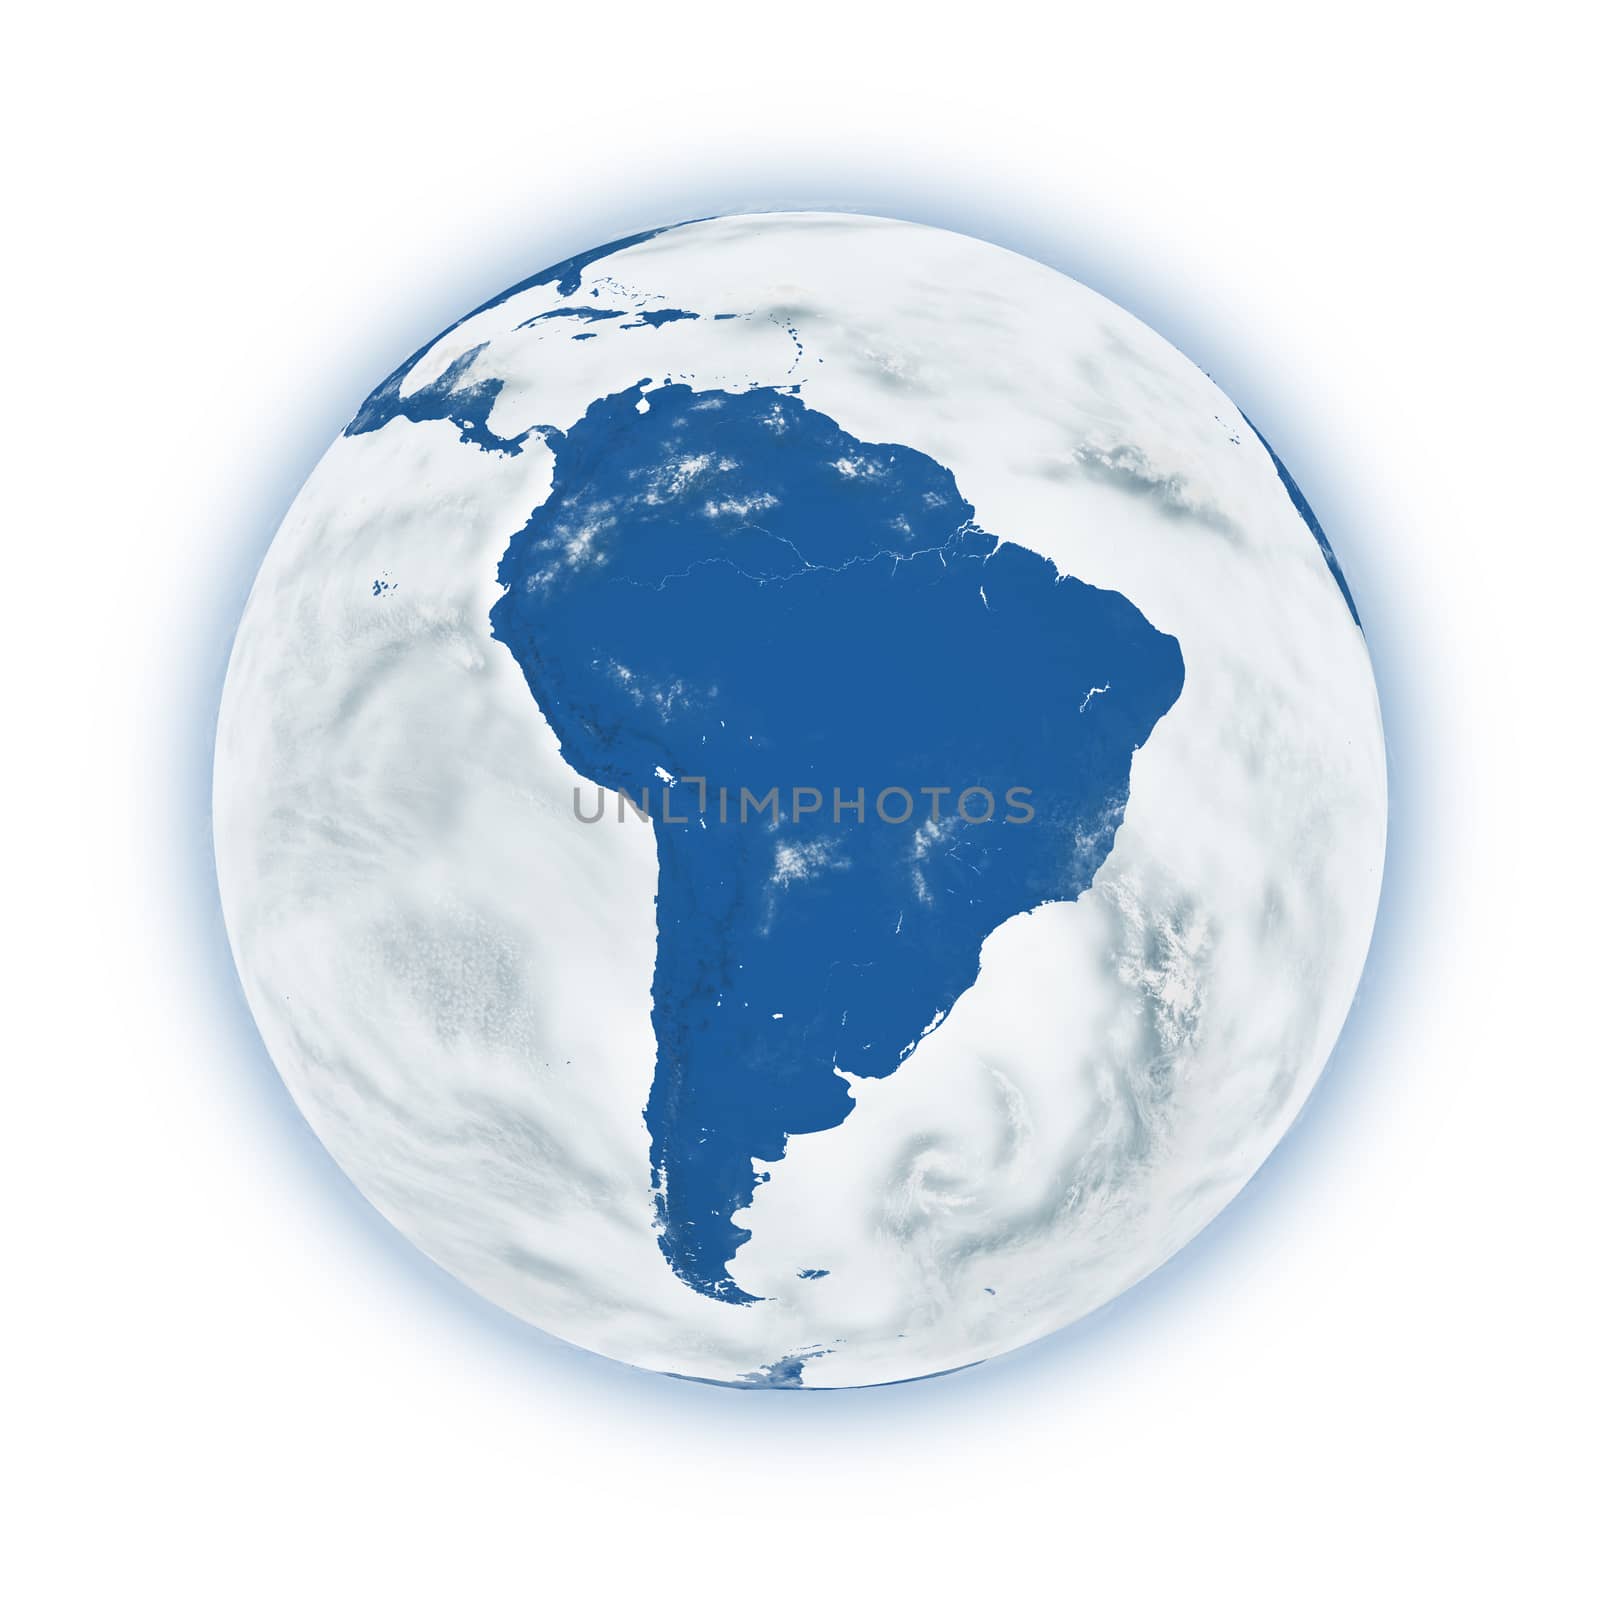 South America on blue planet Earth isolated on white background. Highly detailed planet surface. Elements of this image furnished by NASA.